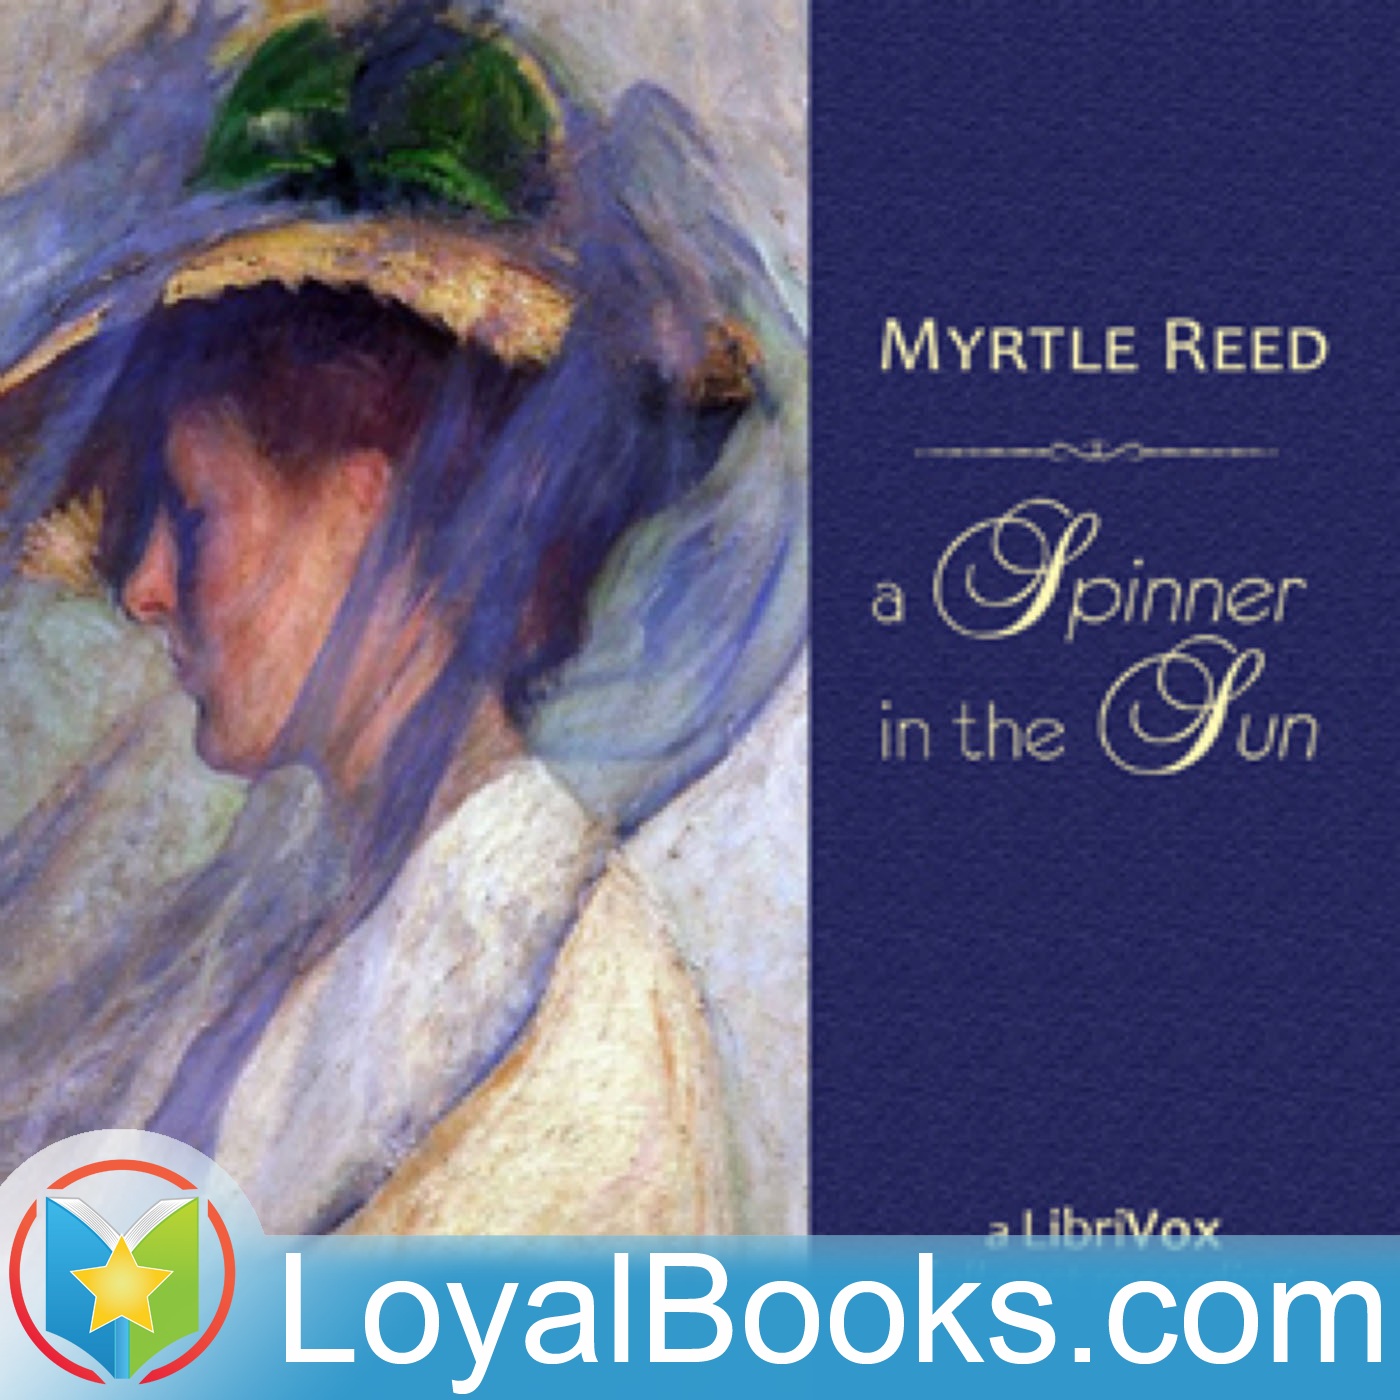 A Spinner in the Sun (dramatic reading) by Myrtle Reed